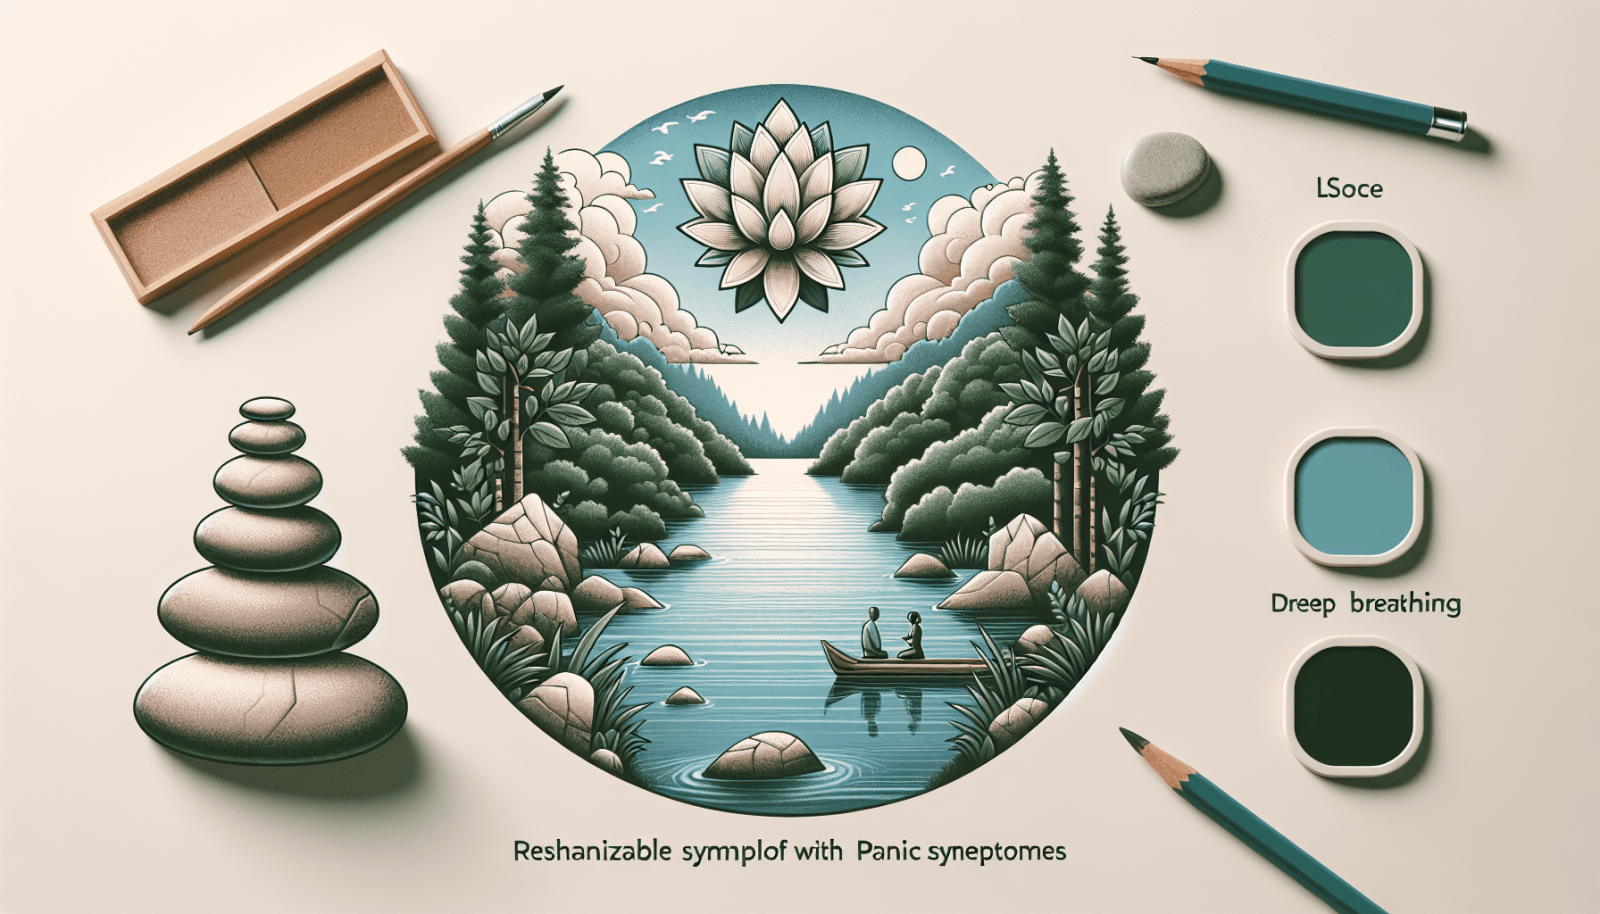 An illustration presenting a serene landscape with a central circular frame showing a lake, pine trees, a person meditating on a boat, and a lotus above, all stylized in muted greens and blues. Surrounding the circle are images of stacked stones, art supplies, and paint lids with labels like "LSoc" and "Dreep breathing," accompanied by a misspelling, "Reshanizable symplaf with Panic synpetomes."